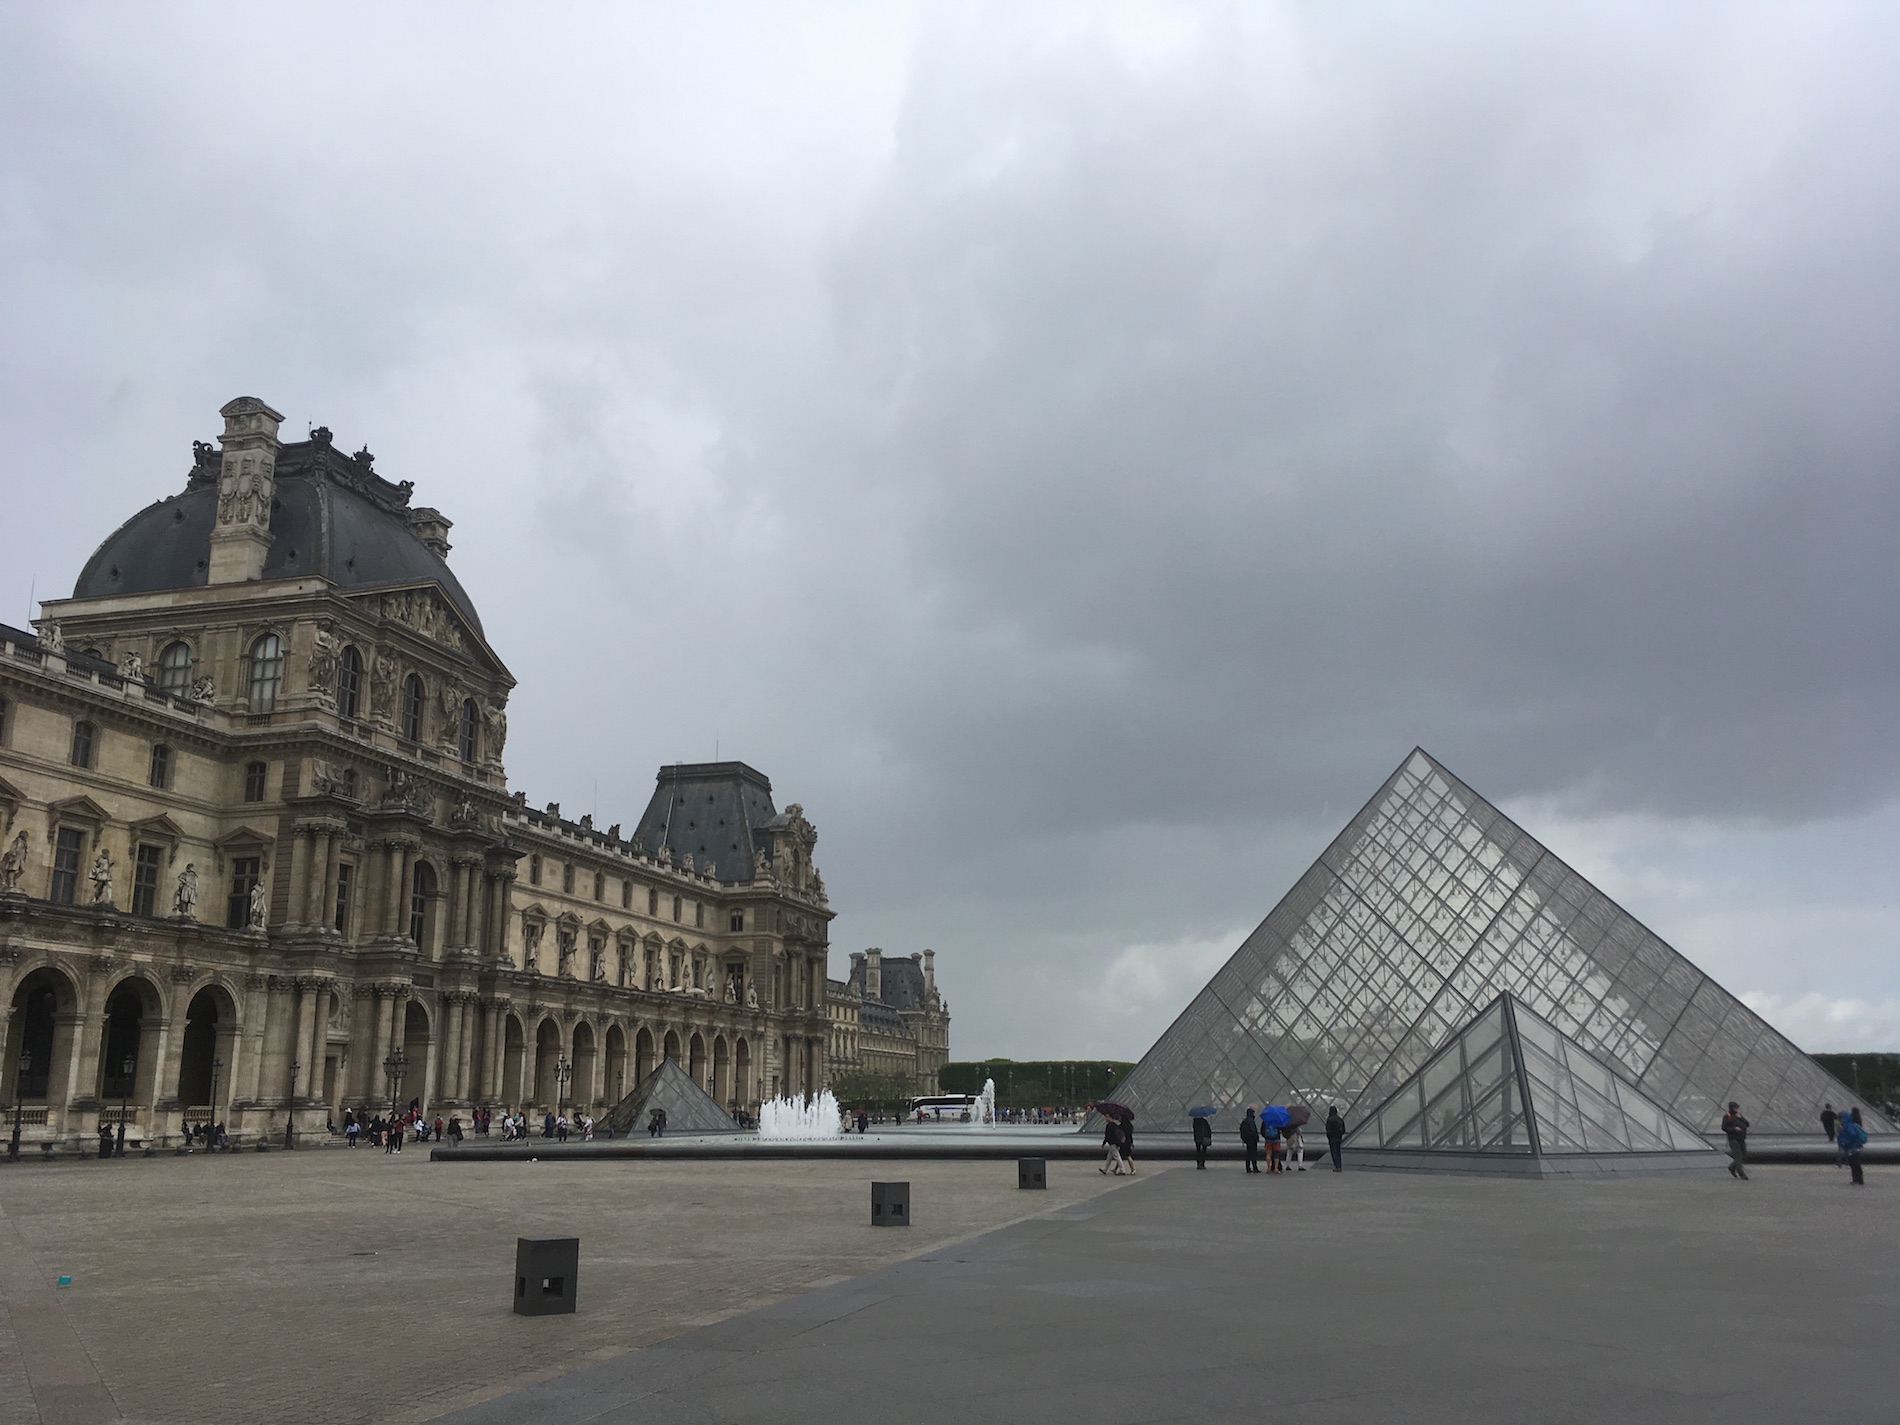 The Louvre, photo by Hoverbear